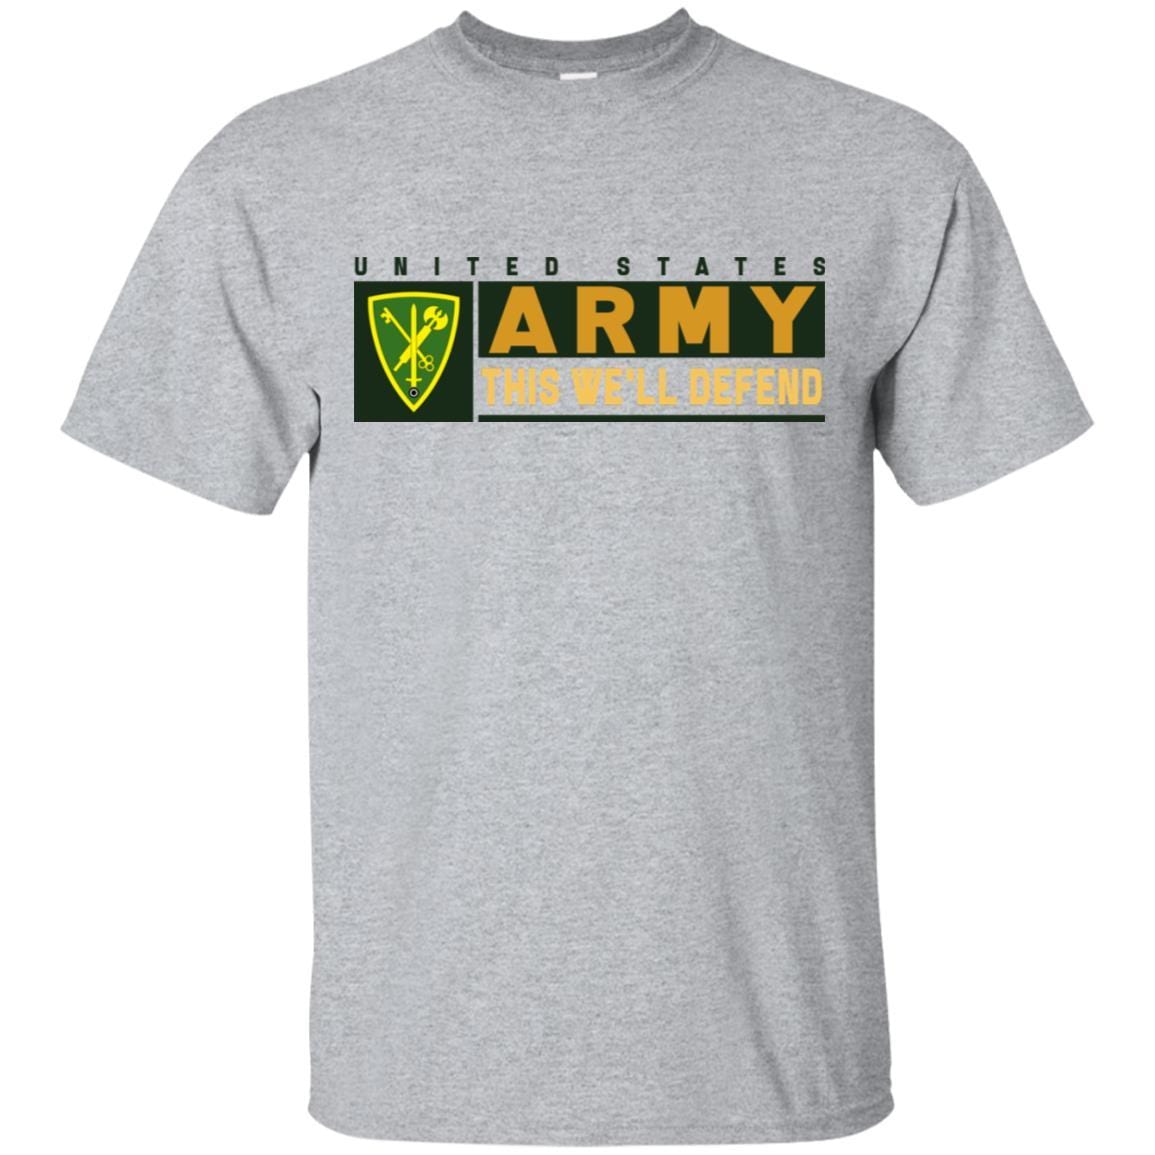 US Army 42ND MILITARY POLICE BRIGADE- This We'll Defend T-Shirt On Front For Men-TShirt-Army-Veterans Nation